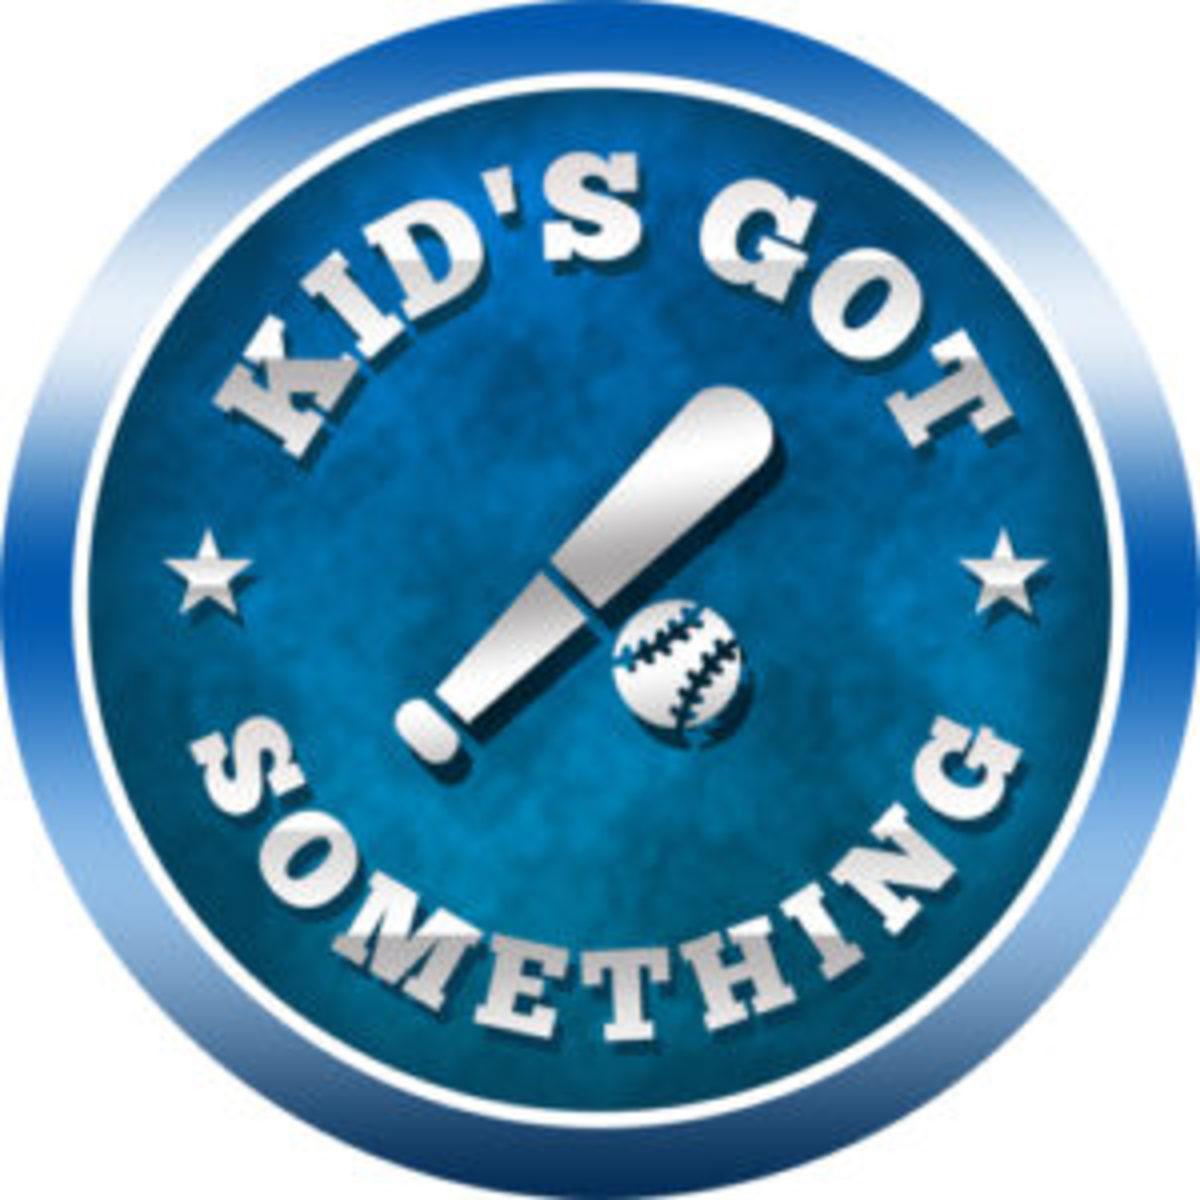  Starting a baseball rookie player set will earn Set Registry members 100 points and this cool “Kid’s Got Something” reward medal.